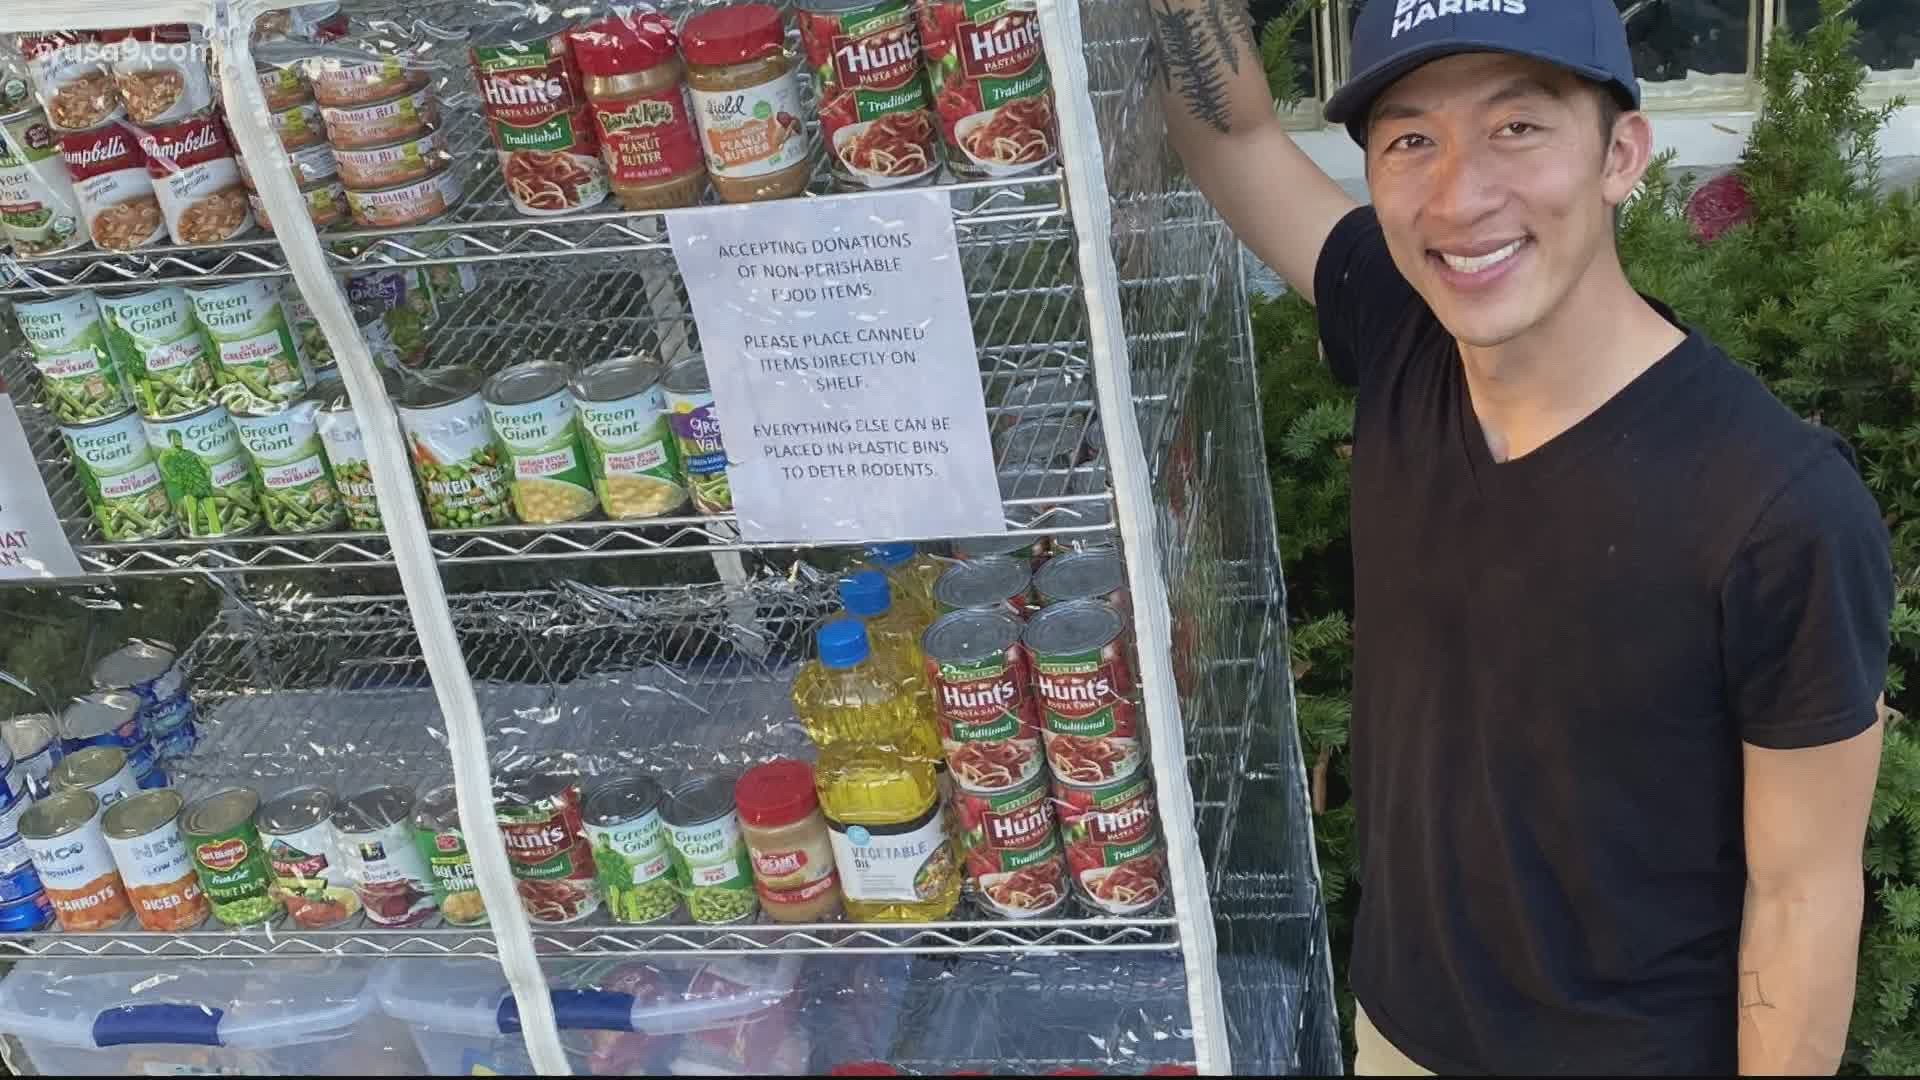 Tri Trinh sought to make a difference during these hard times and founded WithKindnessDC.org and a food pantry to help those in need.